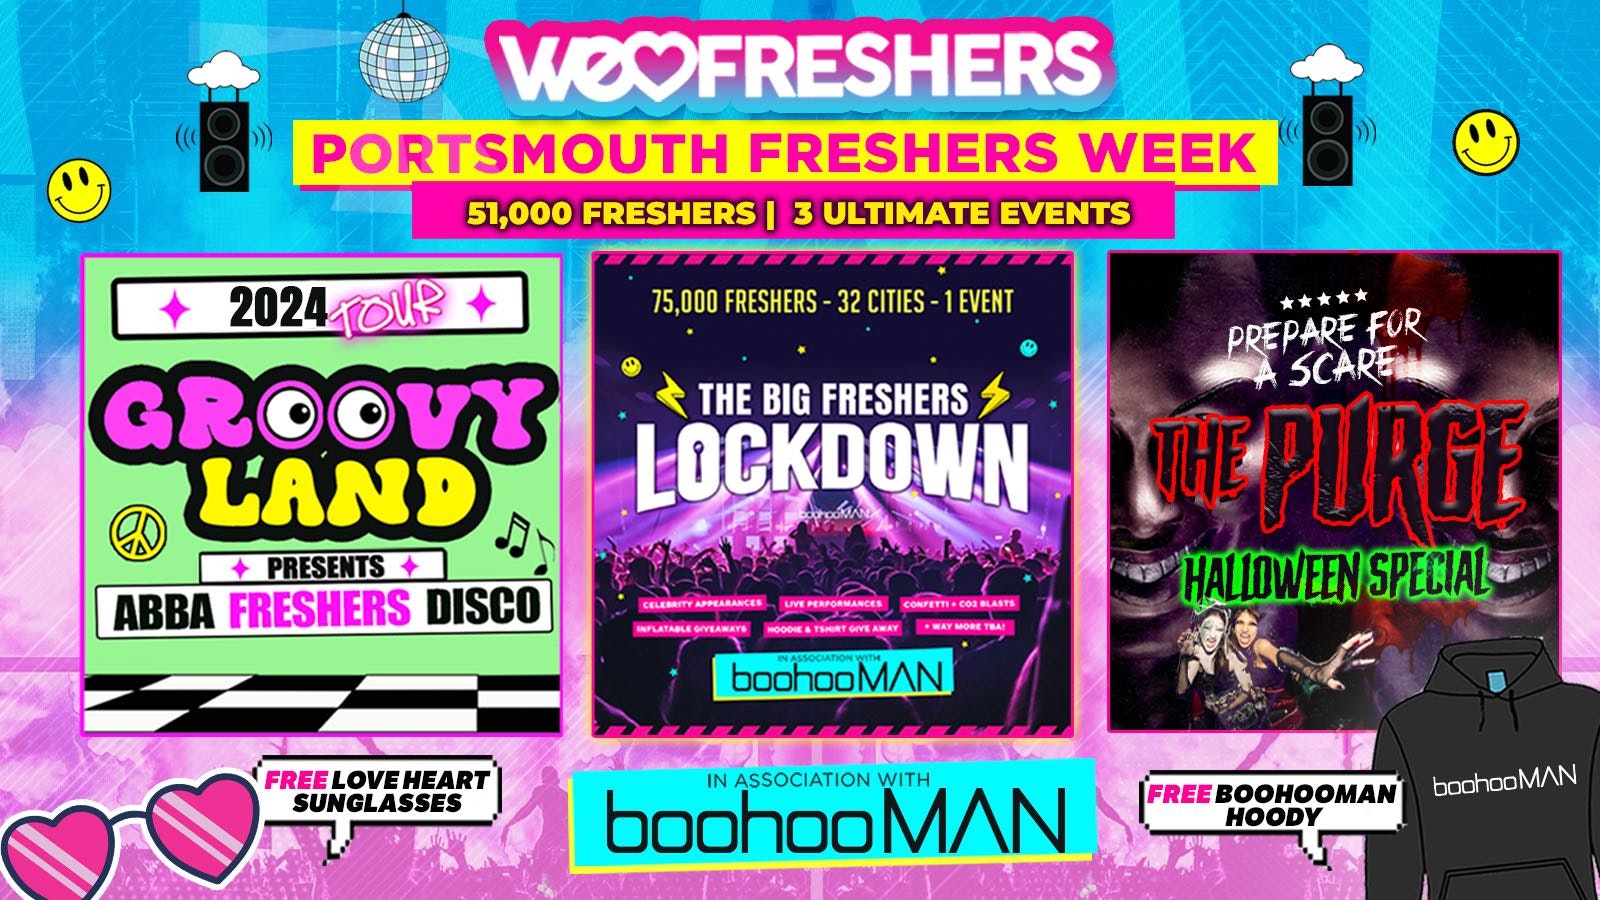 WE LOVE PORTSMOUTH FRESHERS 2024 in association with boohooMAN ❗3 EVENTS ❗